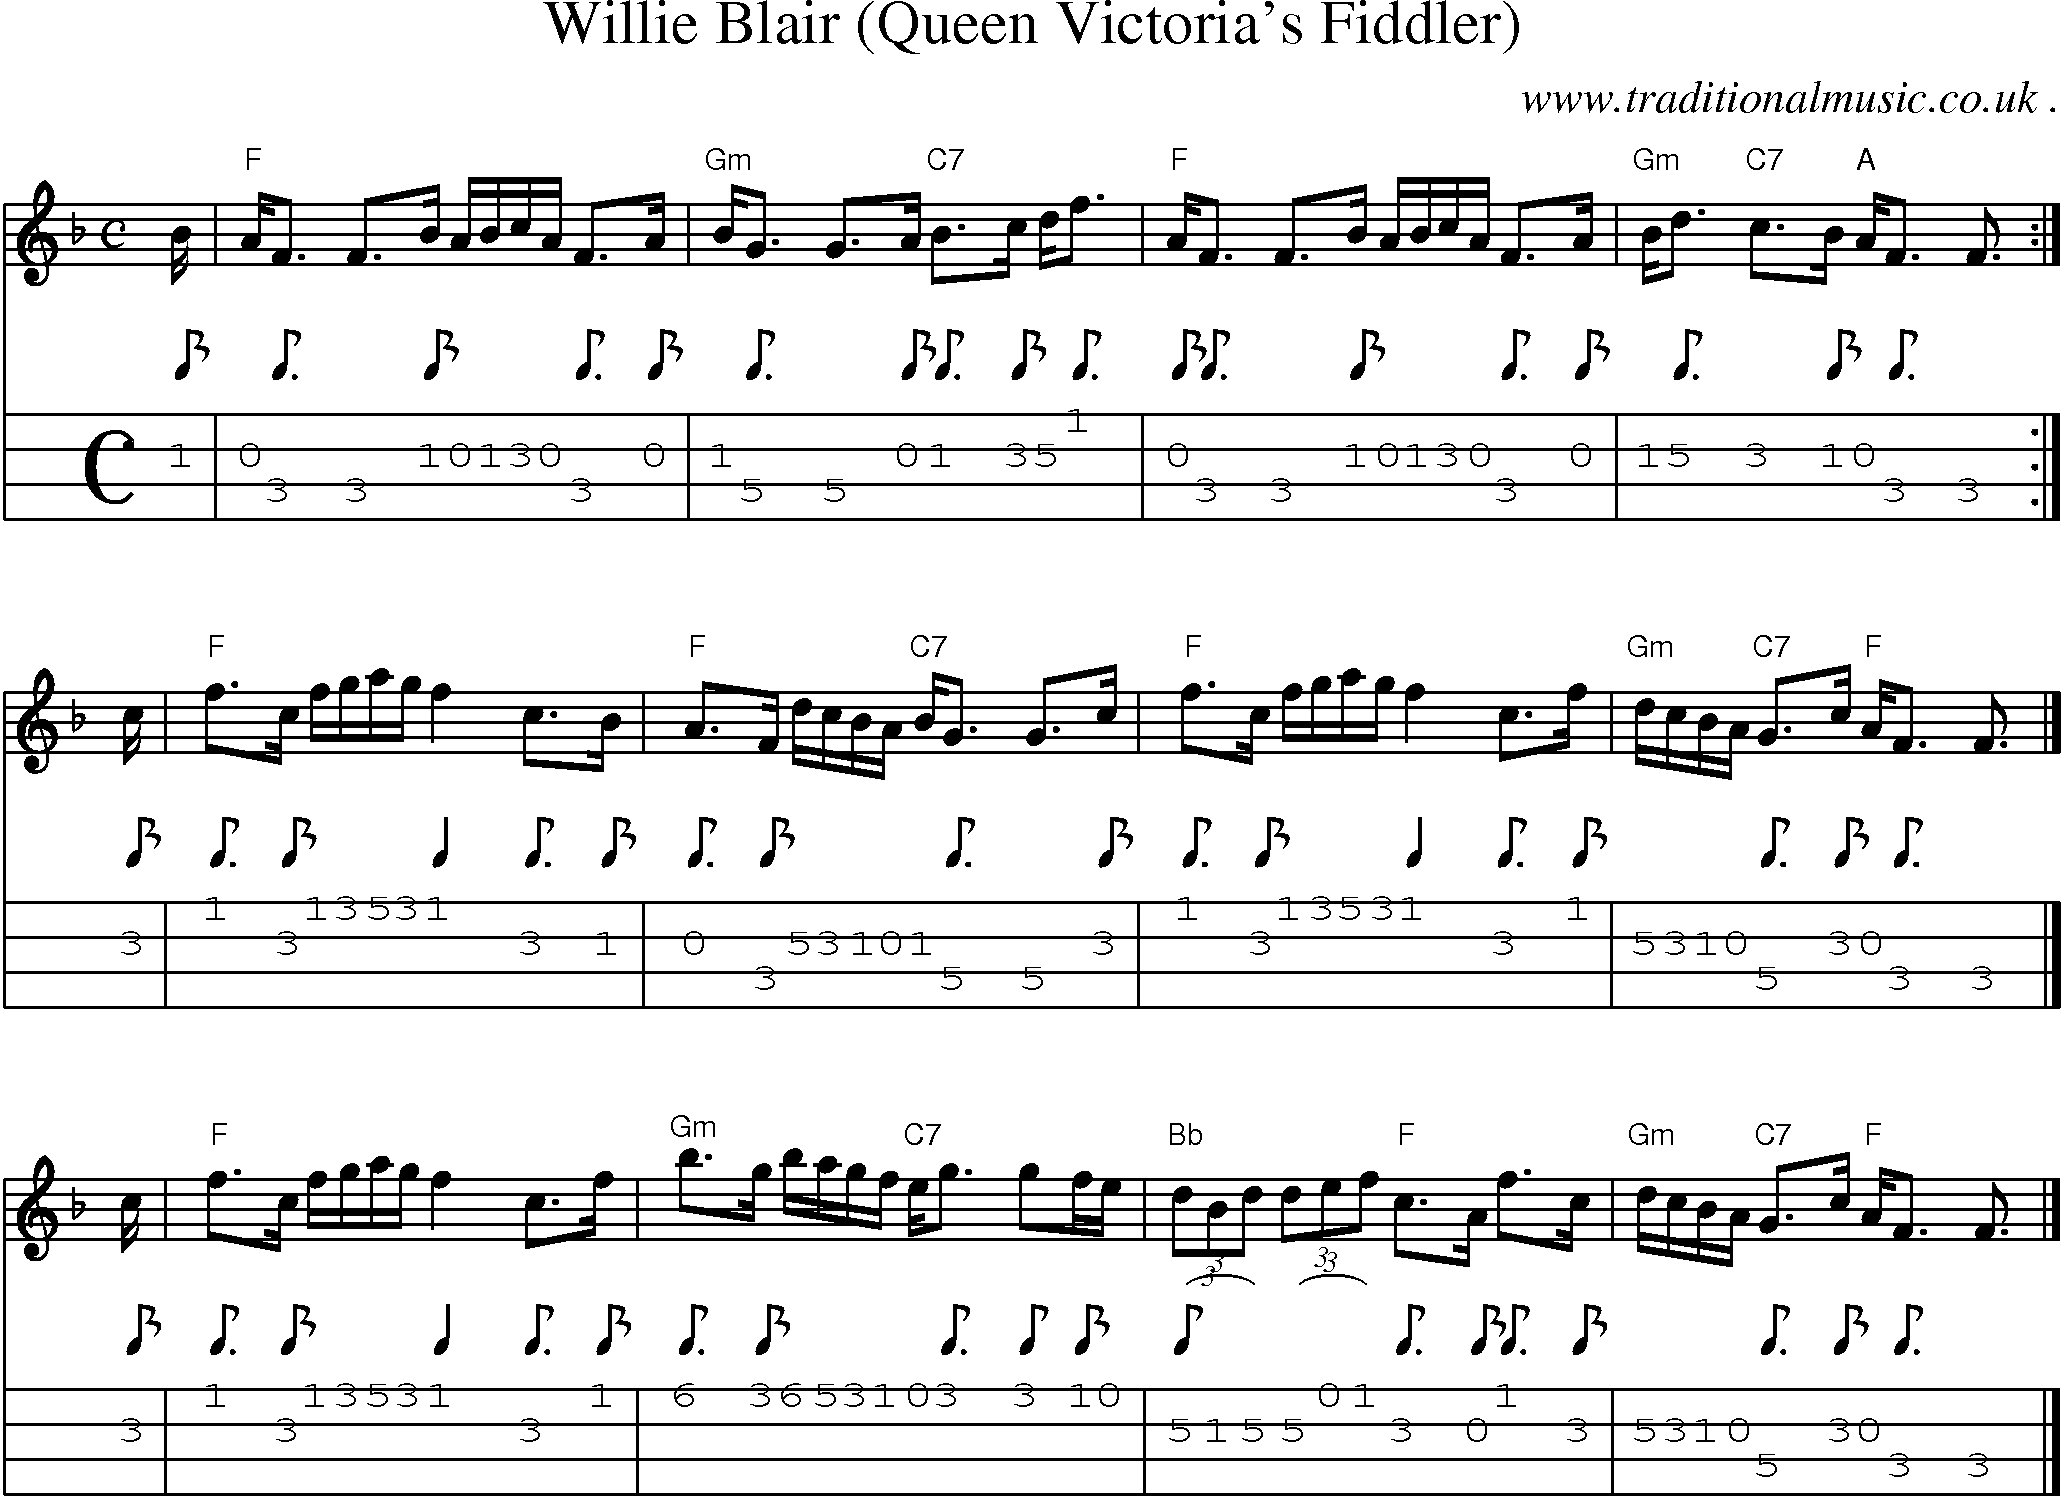 Sheet-music  score, Chords and Mandolin Tabs for Willie Blair Queen Victorias Fiddler